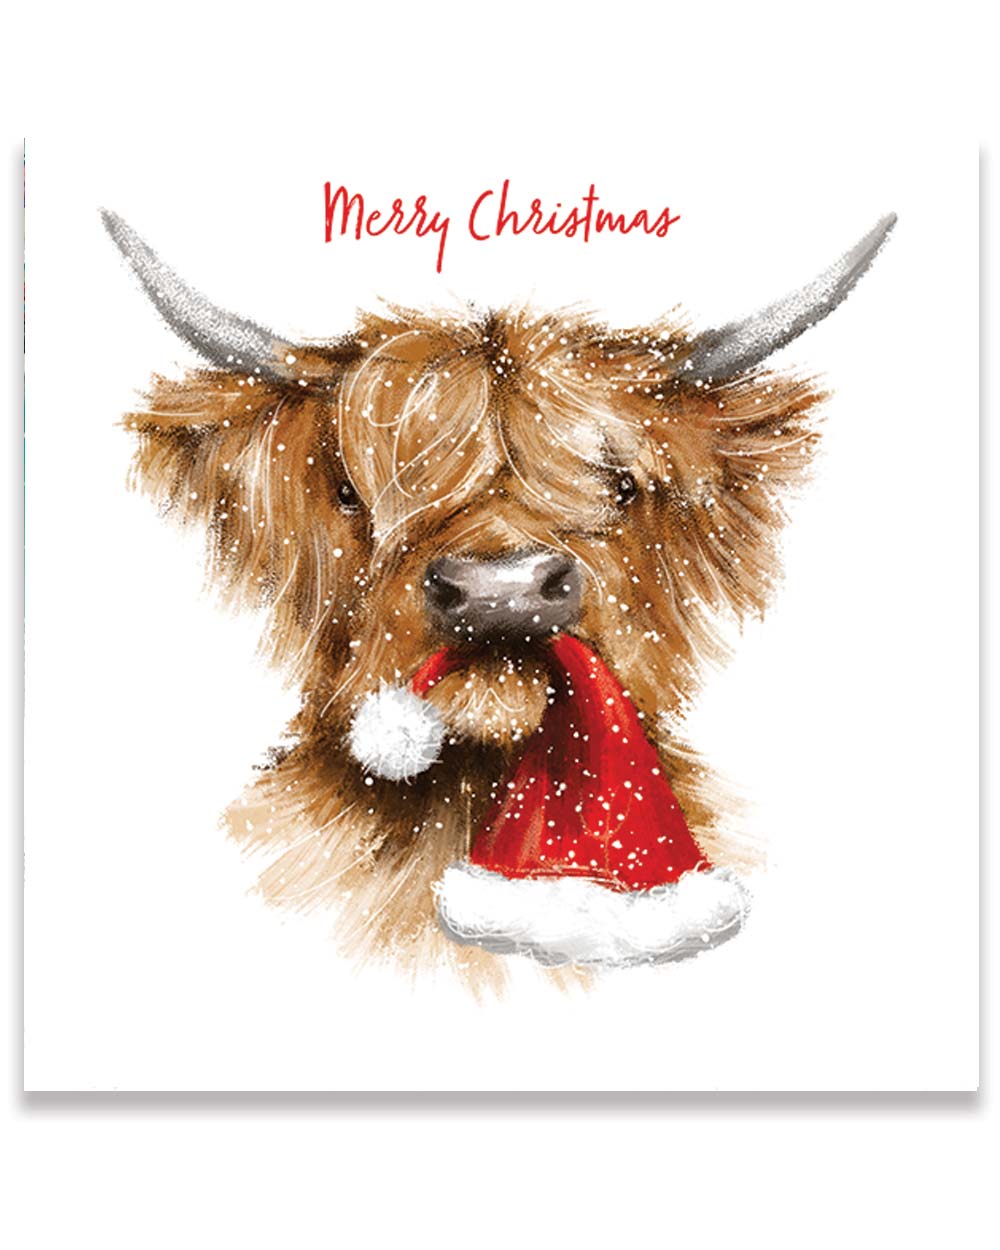 Crafted from FSC certified paper and card and made using environmentally friendly vegetable ink. Making them 100% recyclable.  Each card presents a heartwarming and modern scene: a Highland cow playfully holding a Christmas hat in its mouth, exuding both charm and holiday cheer. The front is adorned with the timeless message "Merry Christmas" in festive red, conveying warm wishes to your loved one